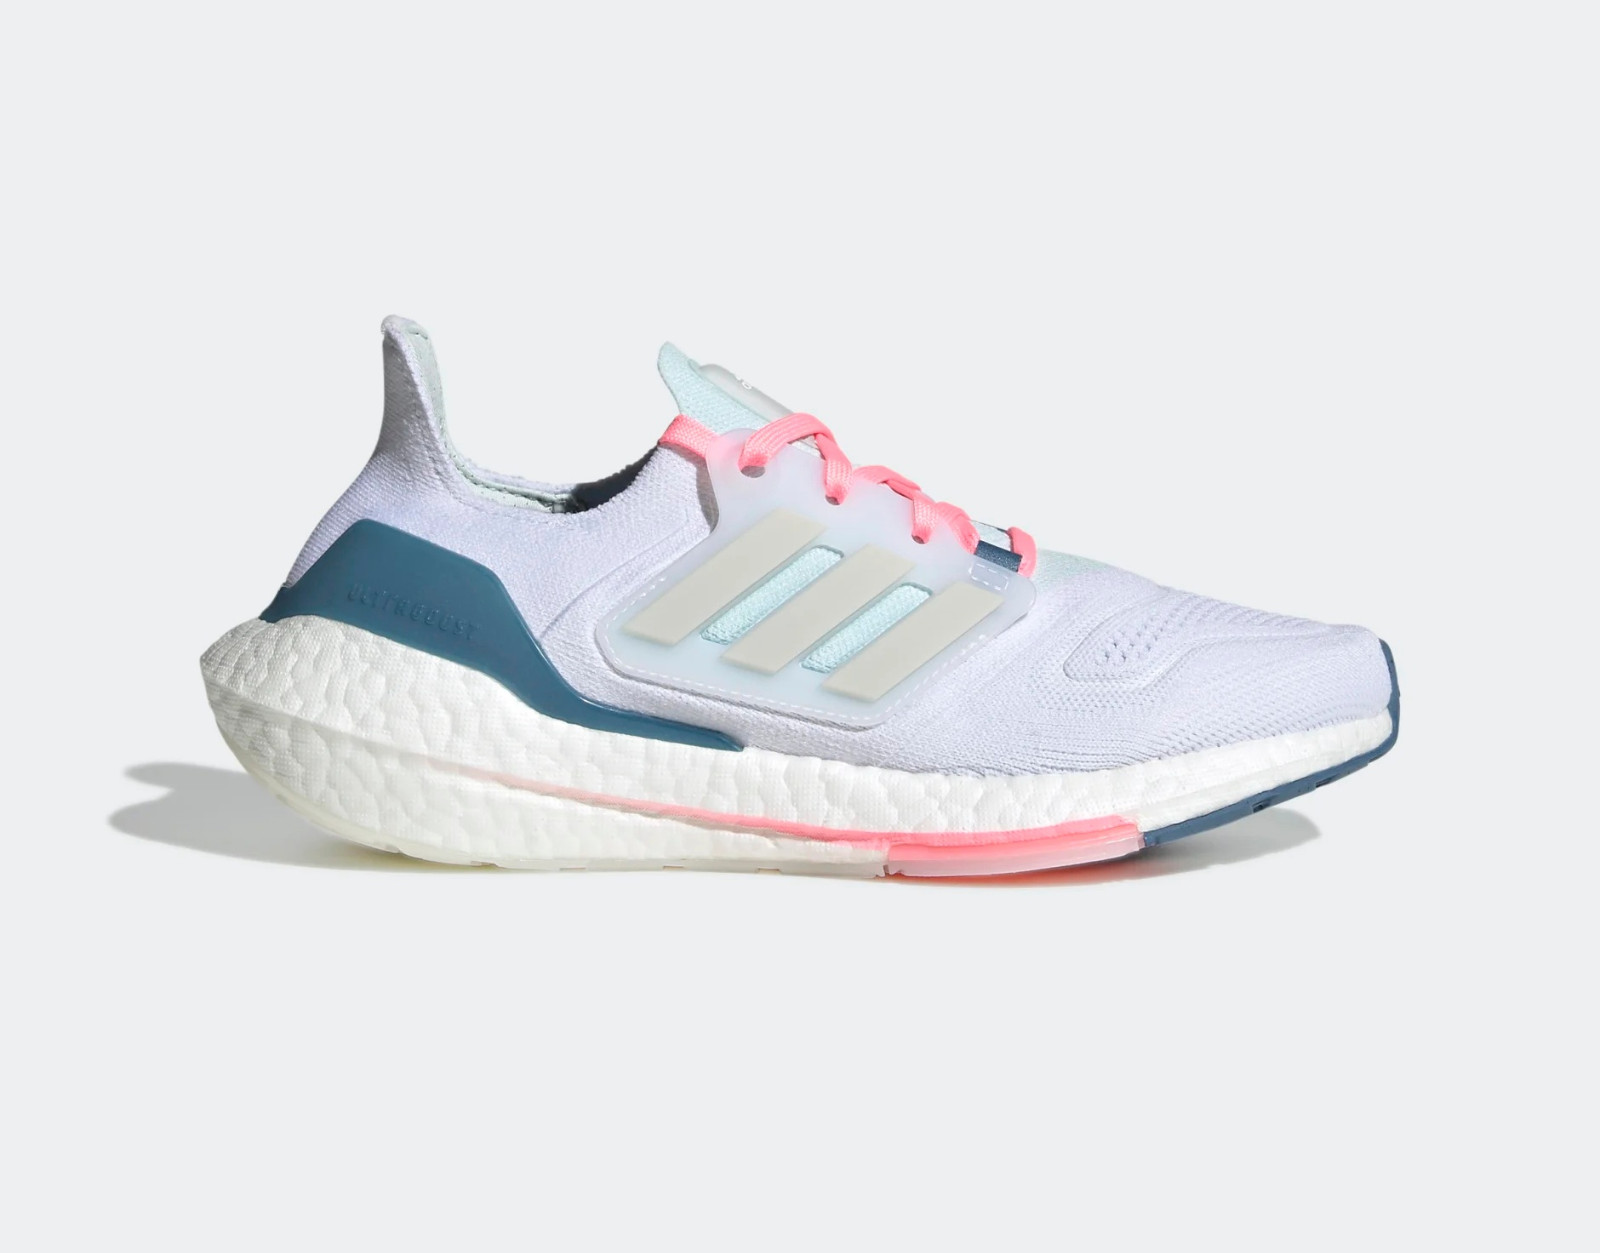 Sepsale - soccer adidas careers application form - soccer UltraBoost 22 Cloud White Grey One Almost